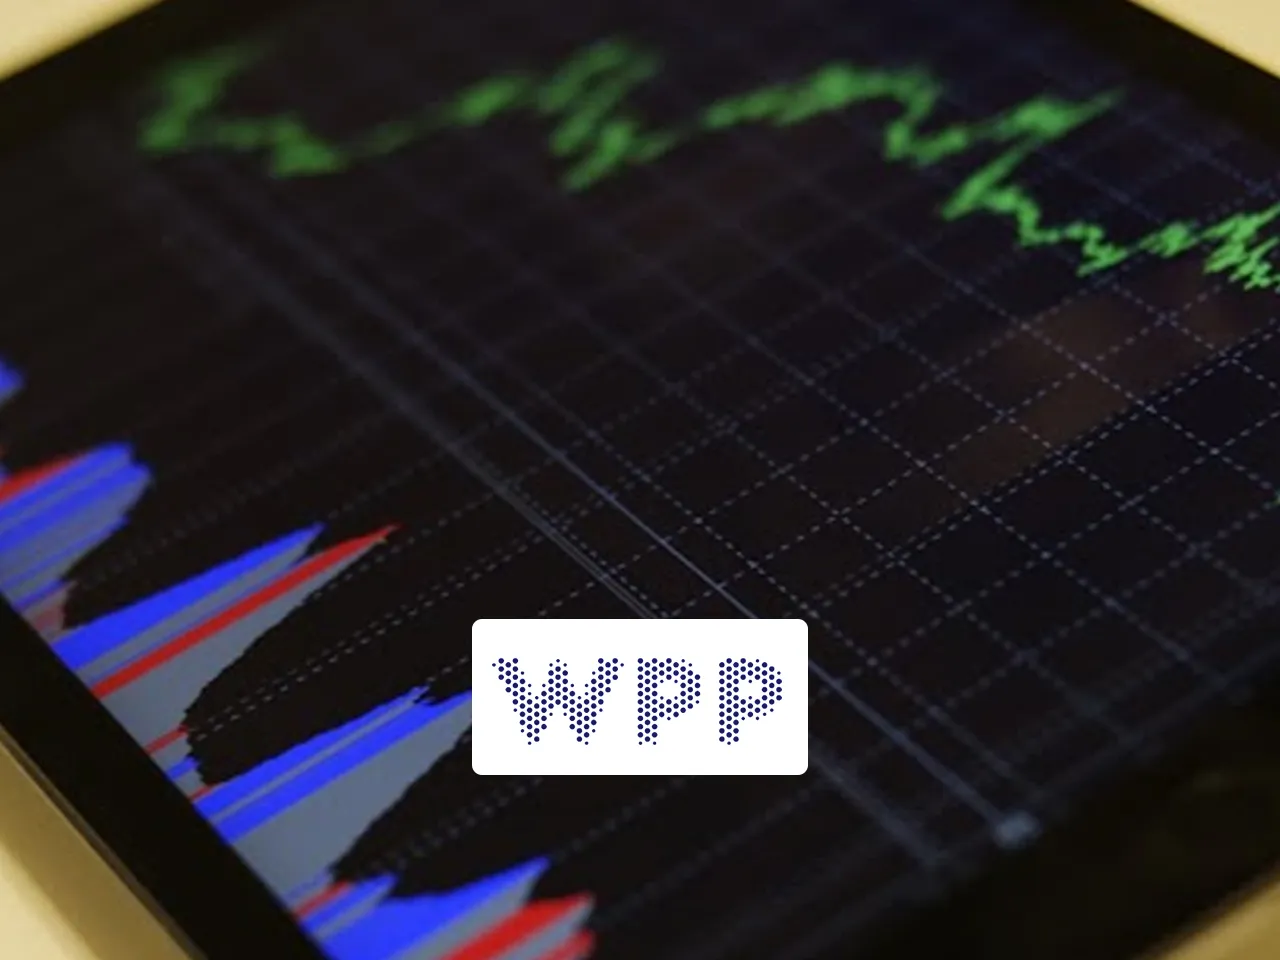 WPP India expects 2023 LFL growth of around 0.5-1%: Report